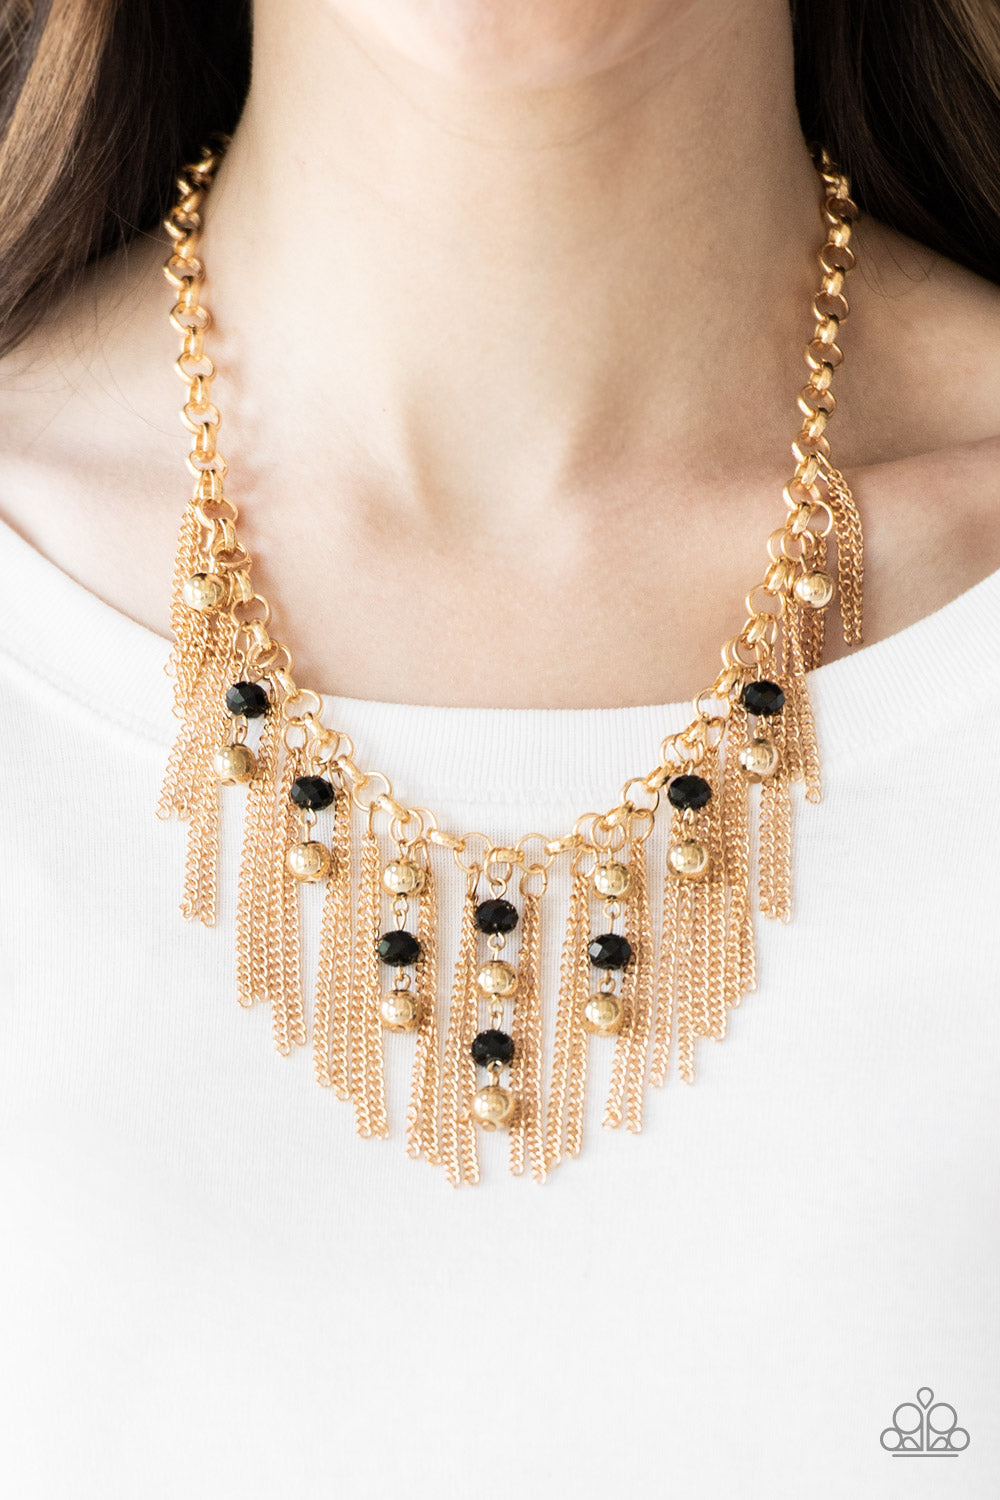 Ever Rebellious - Gold and Black Metallic Bead and Chain Necklace - Paparazzi Accessories